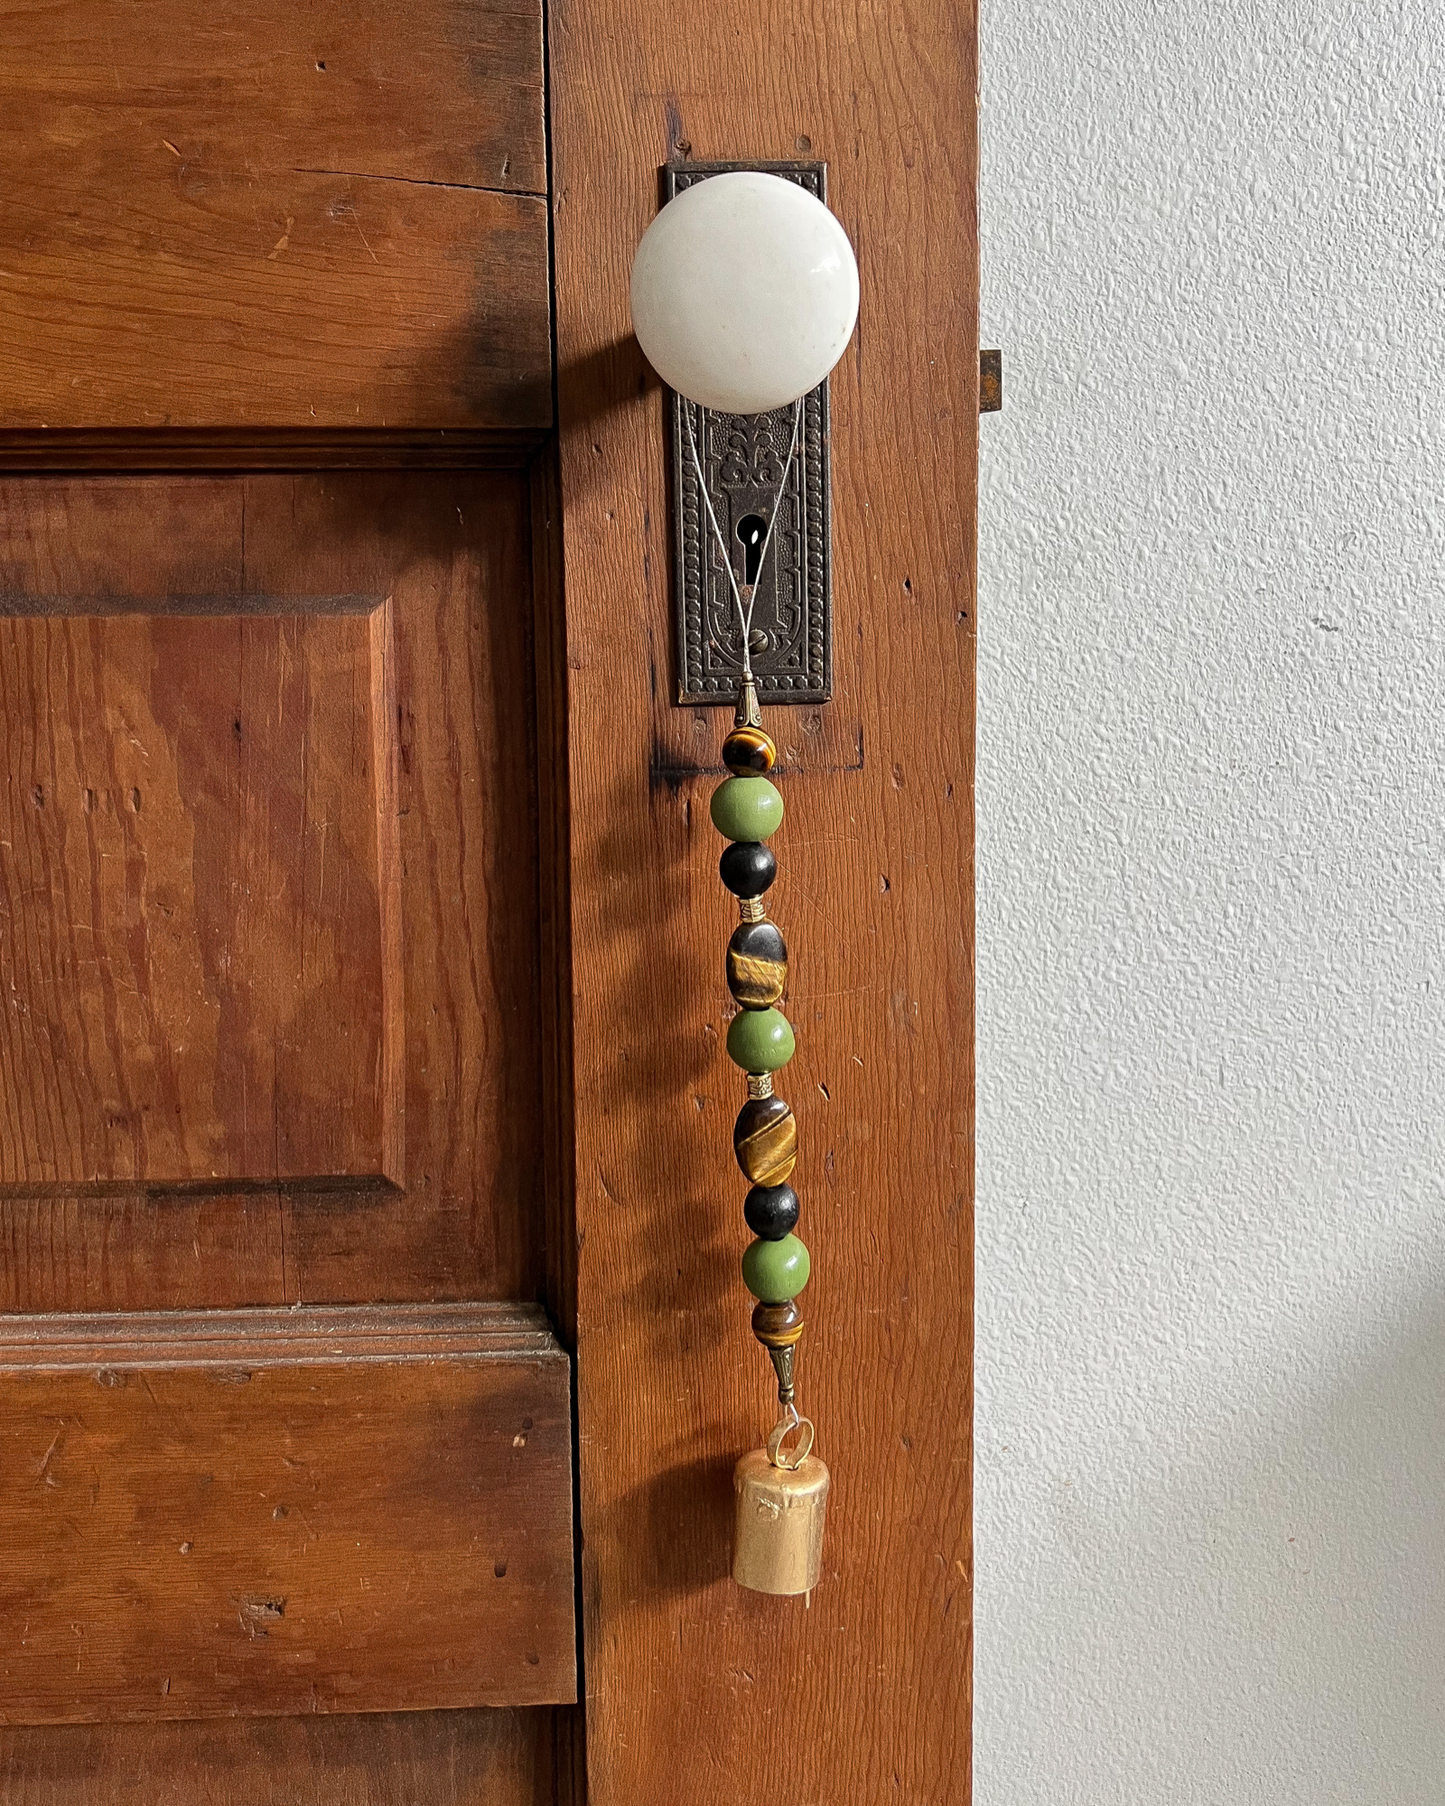 Single strand of wooden bells, tiger's eye crystals, and a golden bell hanging from an antique doorknob.